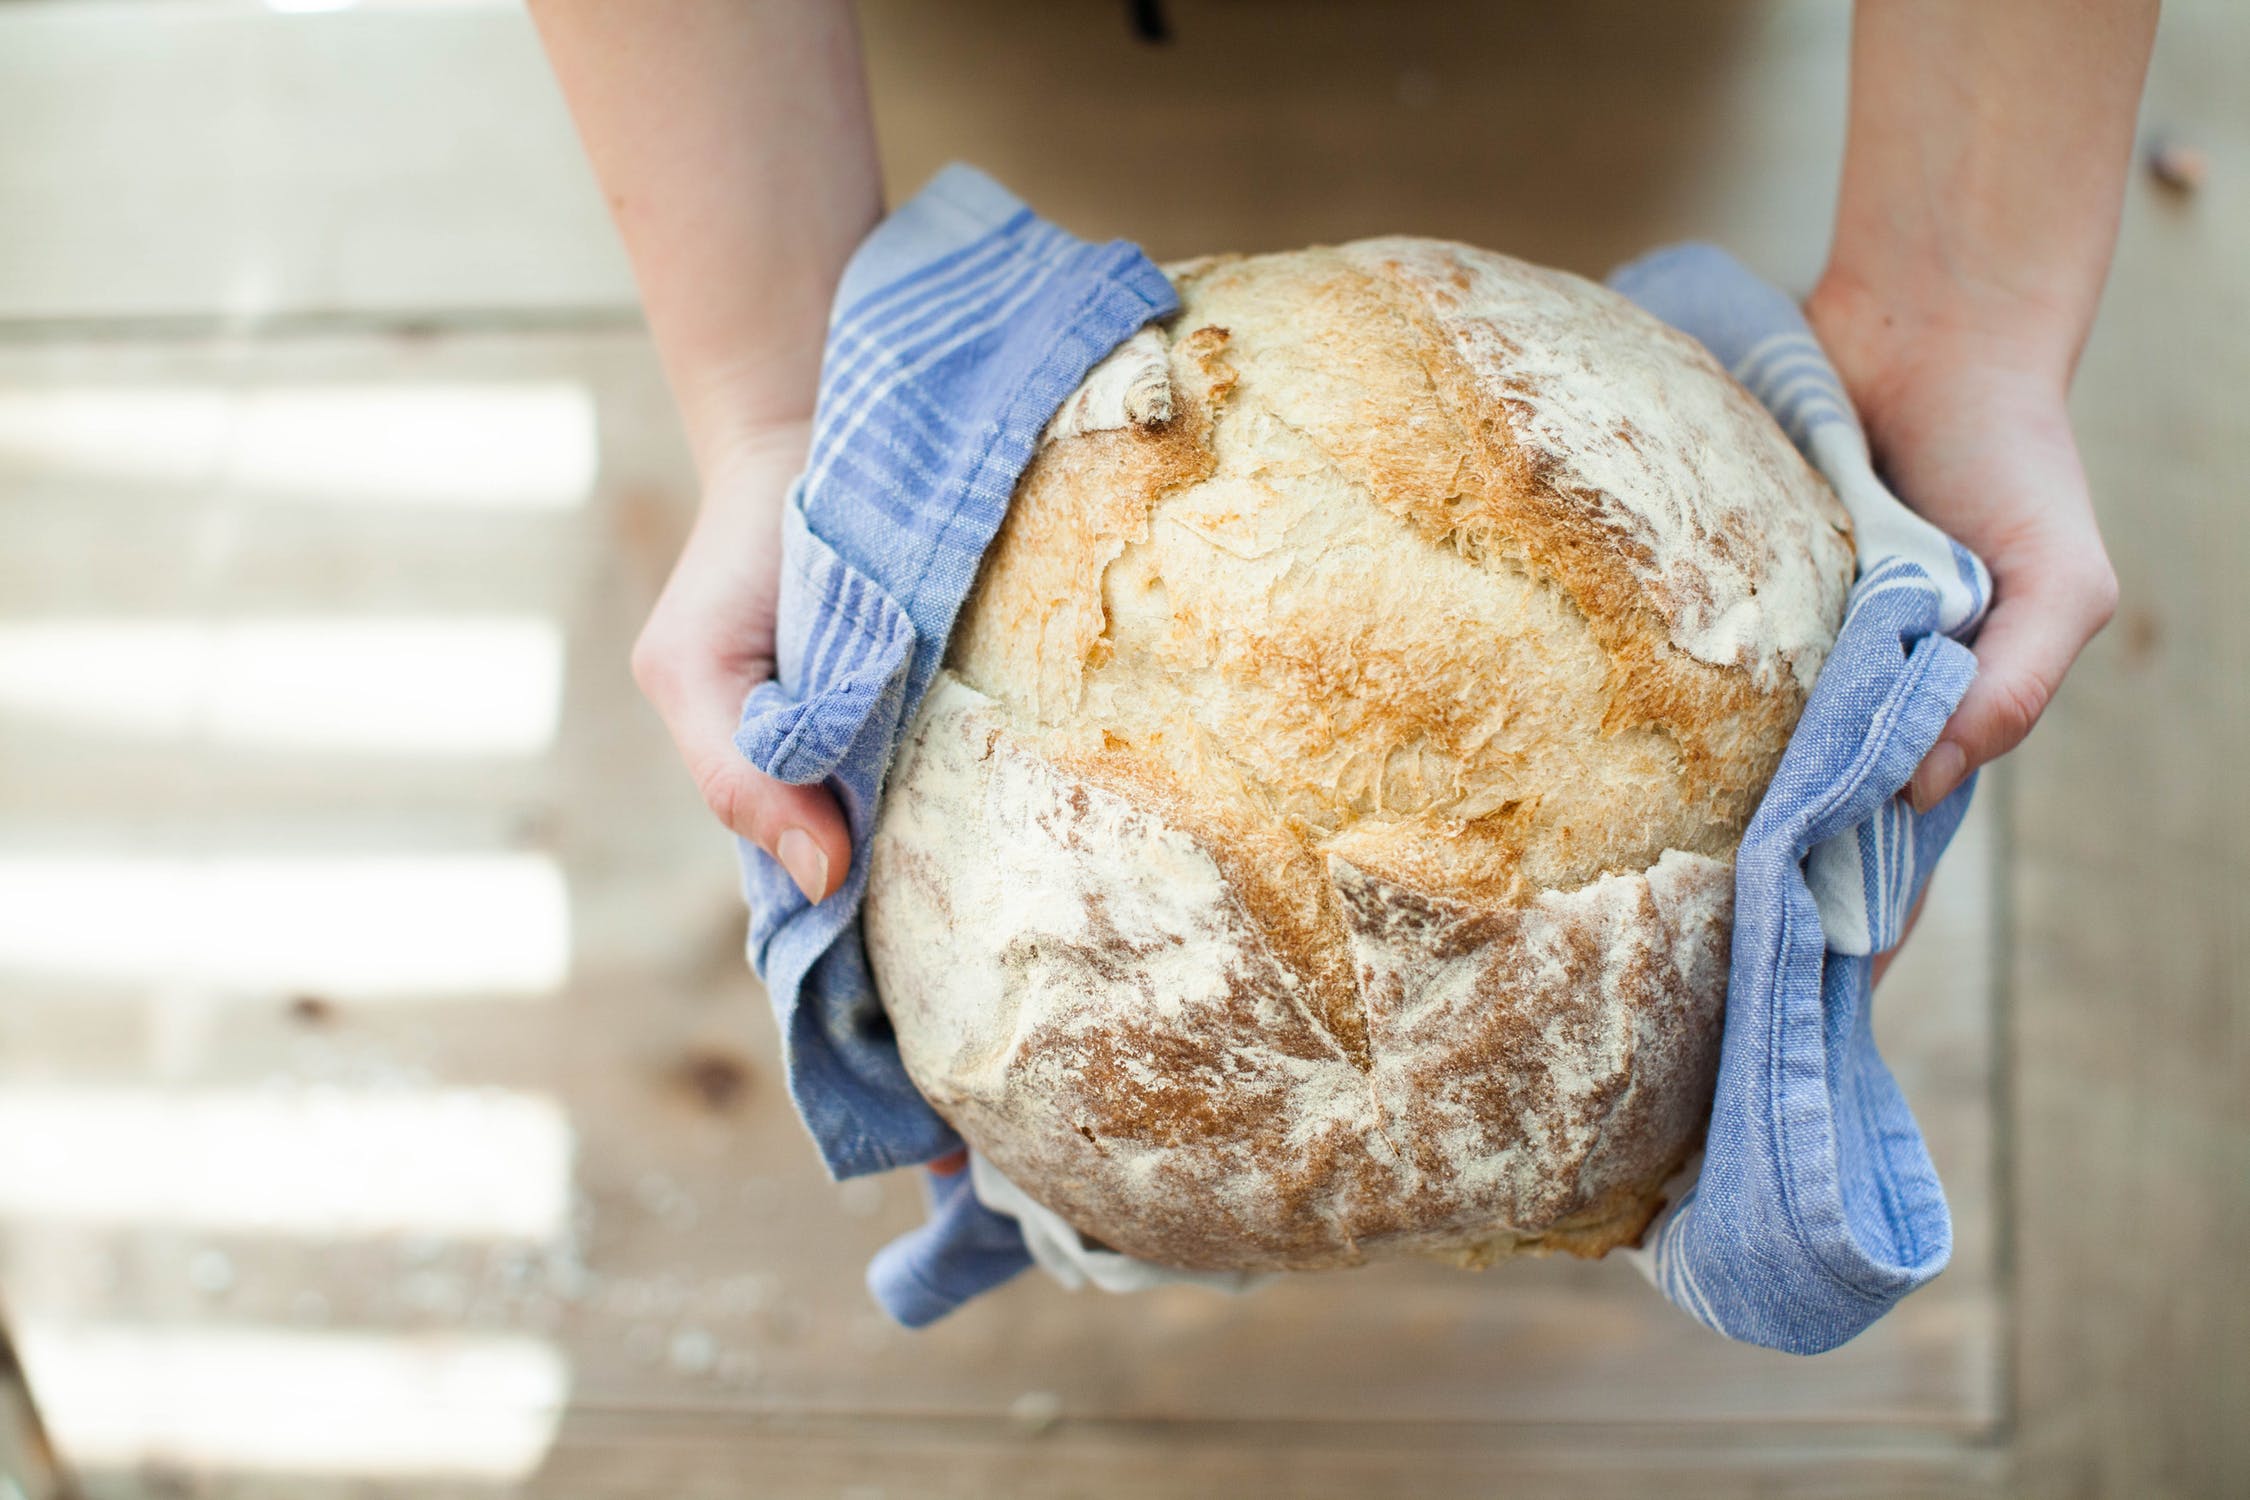 How to Prolong the Freshness of Bread